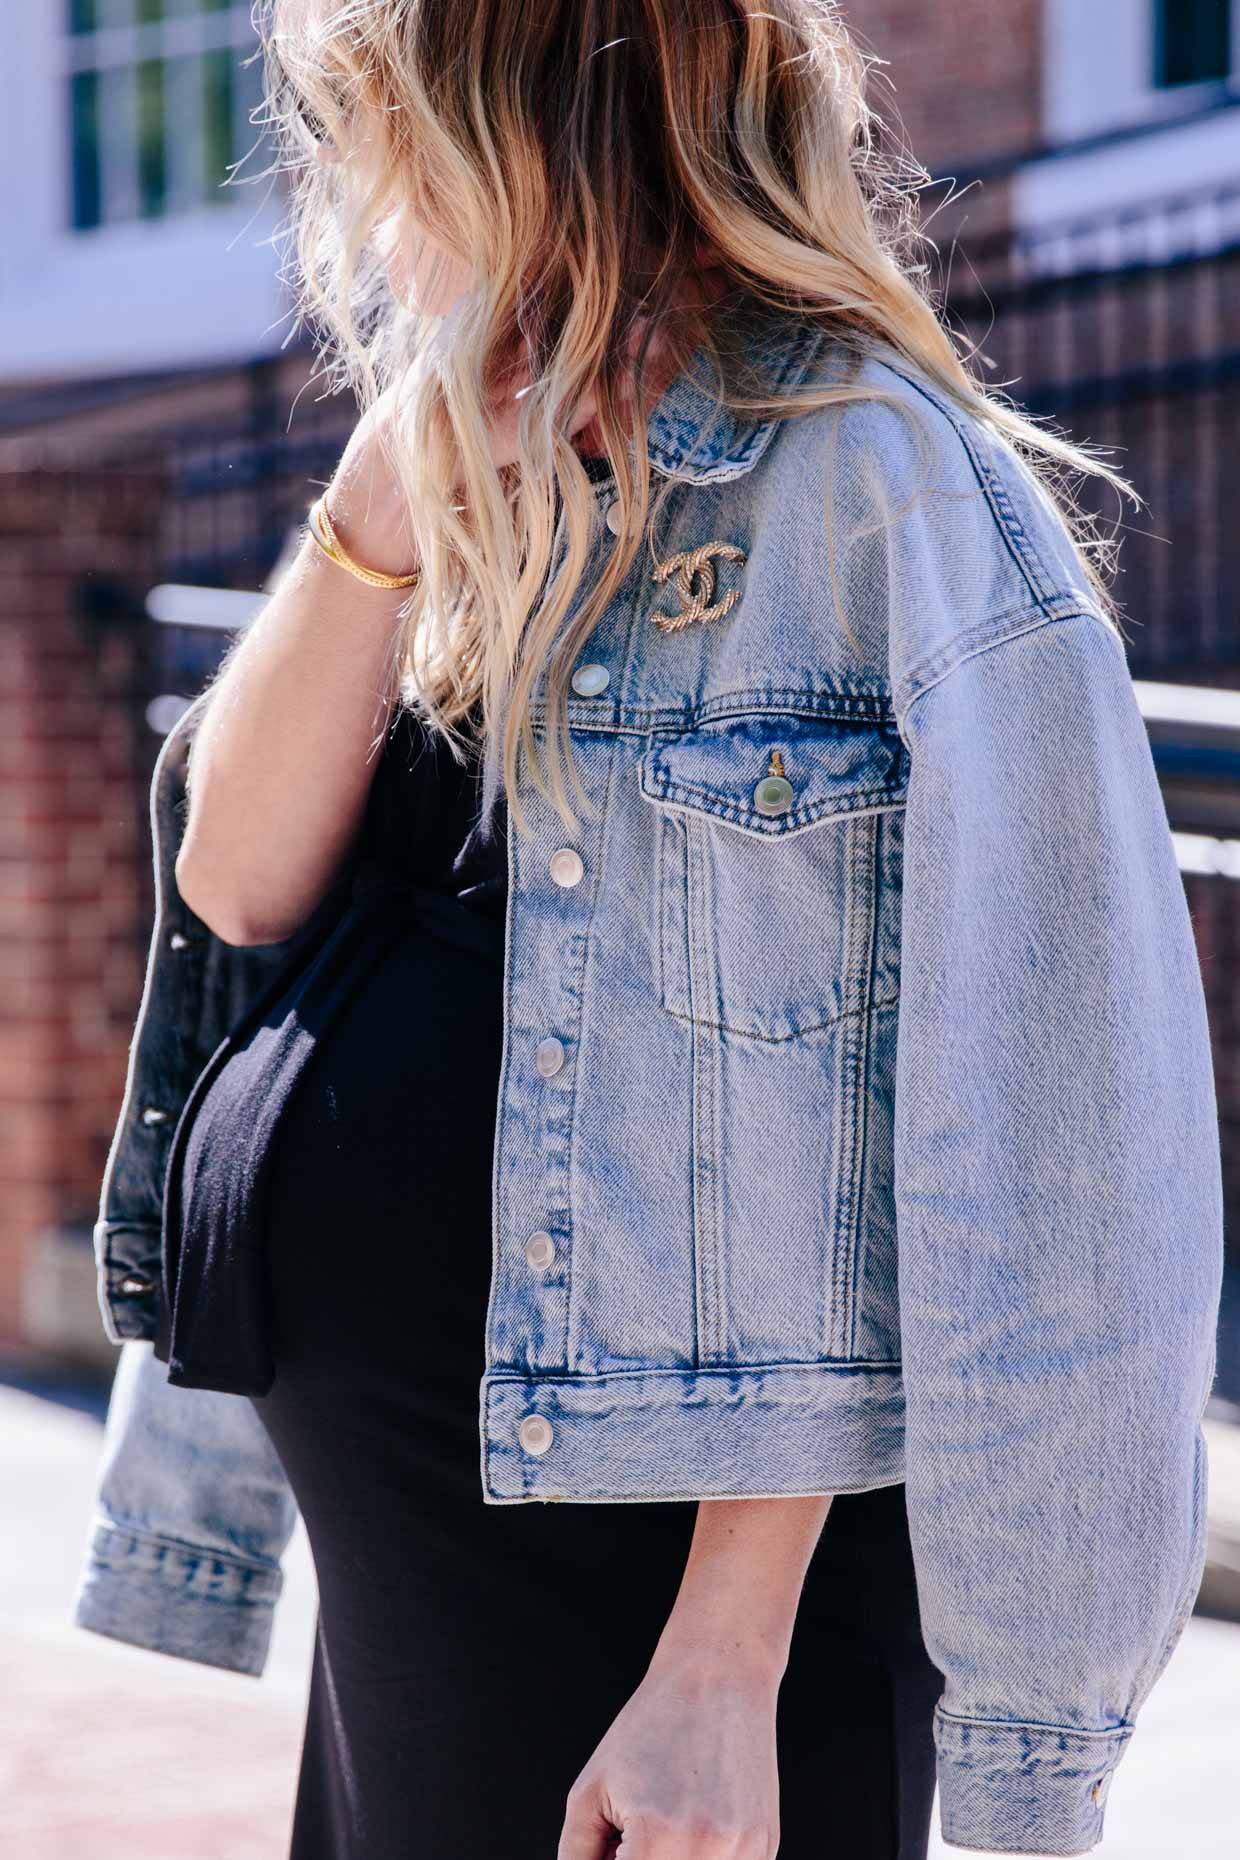 Pin by Linda McCall on Chanel Denim Jacket